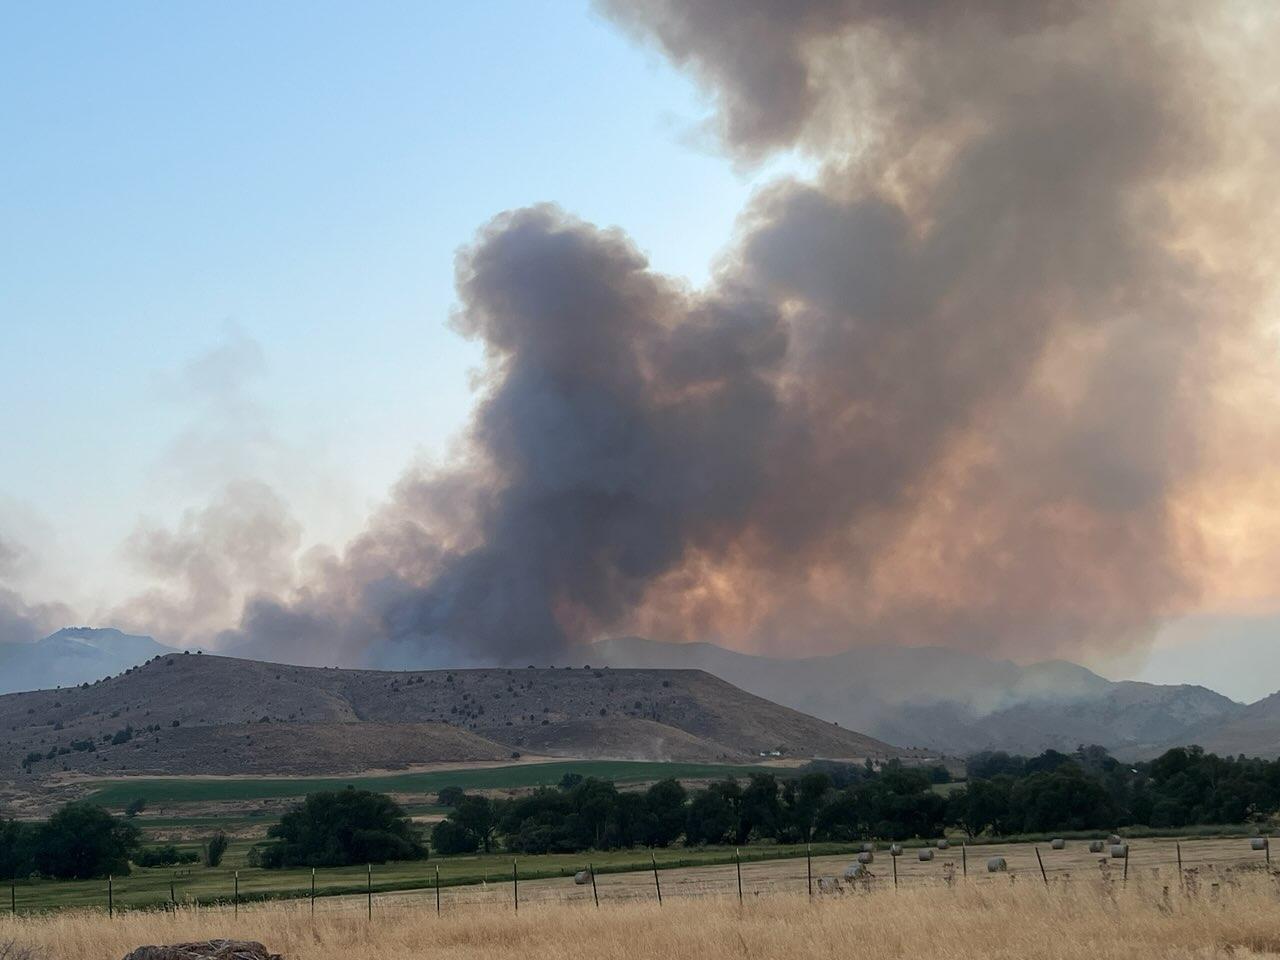 Photo of smoke column behind hills, trees and pasture.